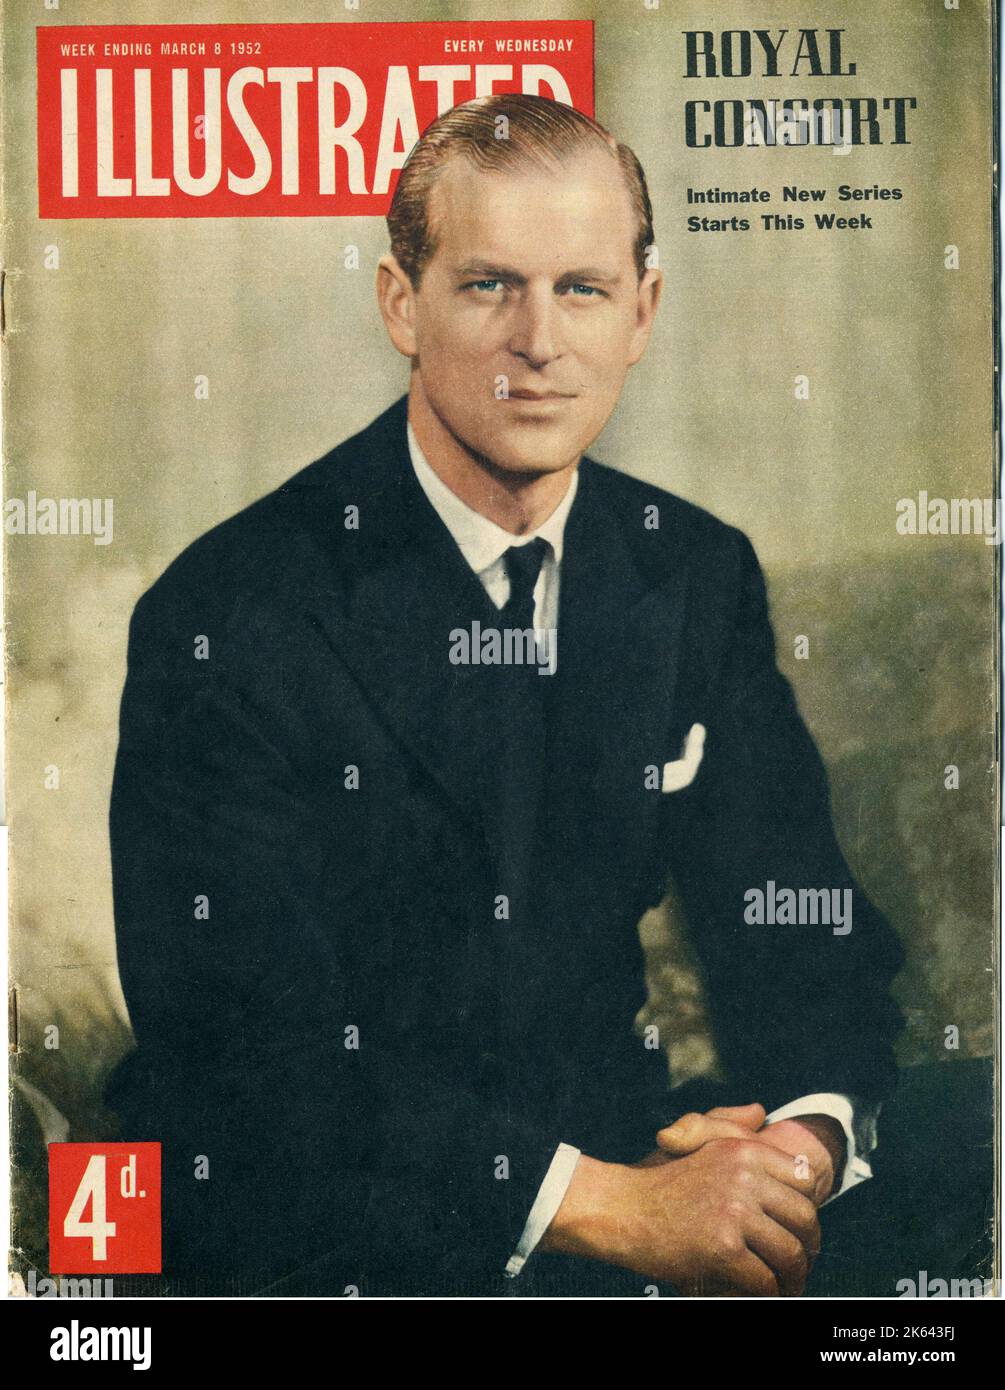 Front cover of Illustrated magazine featuring a photograph of Prince Philip, Duke of Edinburgh with the announcement of 'an intimate new series' starting that week. Stock Photo